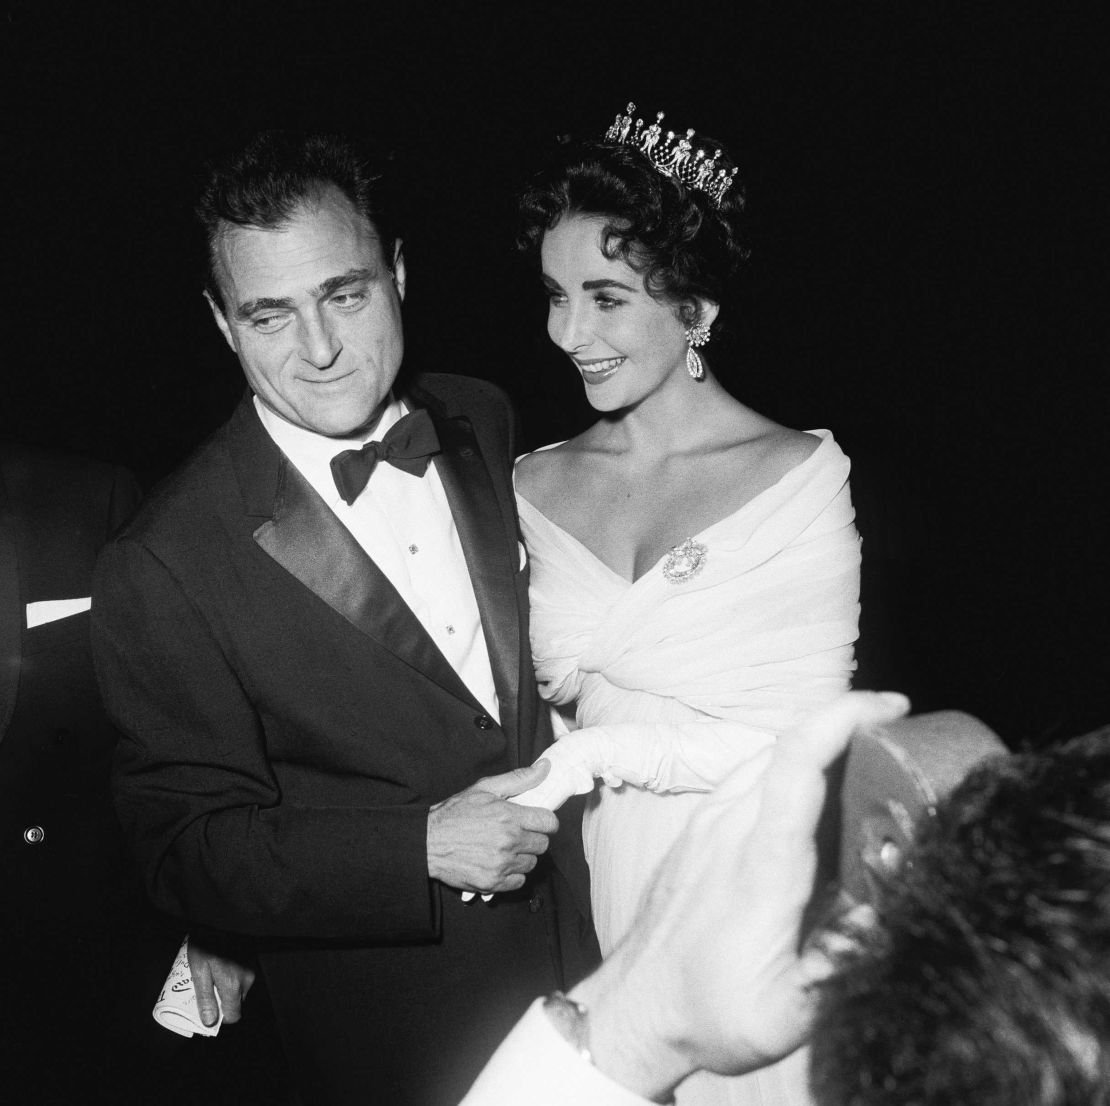 Elizabeth Taylor swaddles herself in white for the 1957 festival, accessorizing with a modest crown and her third husband, producer Mike Todd.